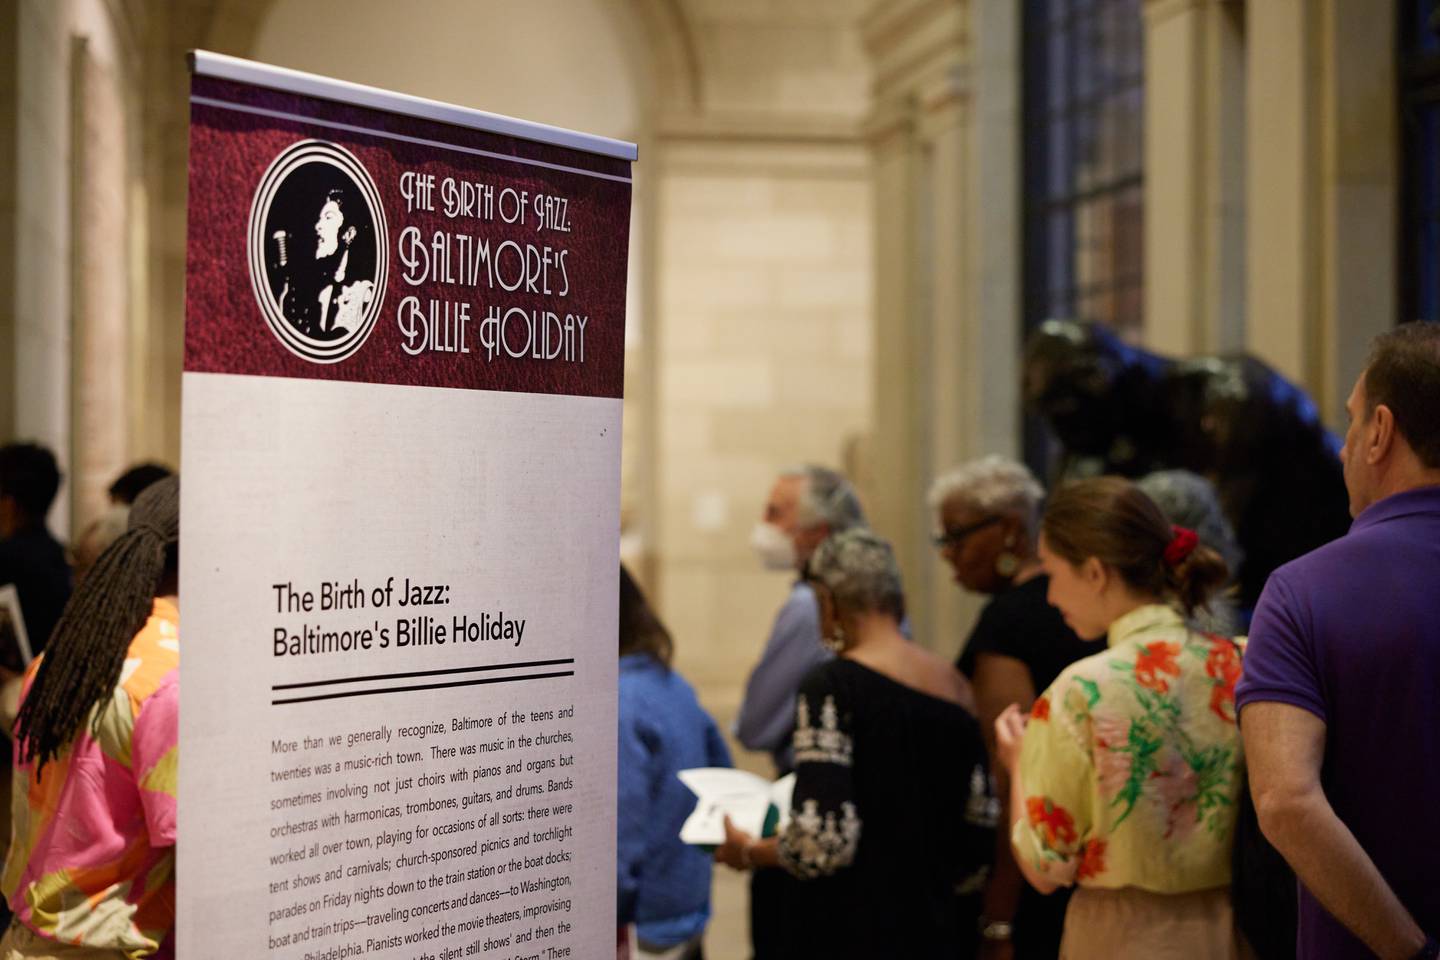 The Baltimore Museum of Art sponsored a Cultured Report piece on a Billie Holiday collection at BMA put on by John Hopkins University: "The Birth of Jazz: Billie Holiday’s Baltimore." It's featured a lecture and performances and showcased archival images of Holiday.